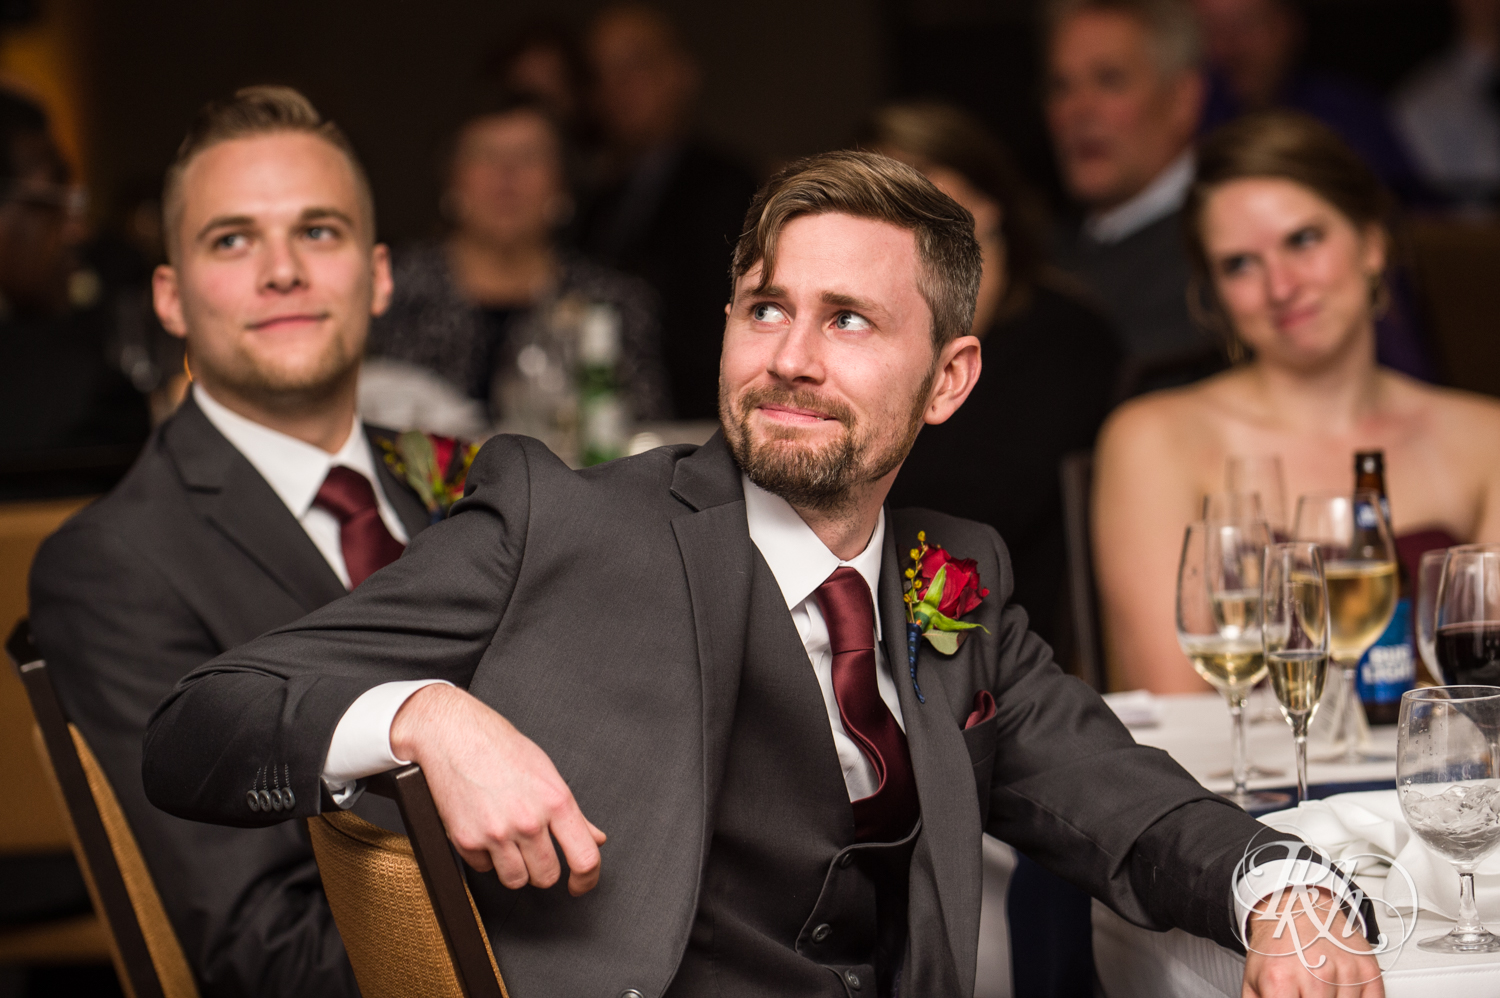 Groom cries during speeches at wedding reception at at Courtyard by Marriott Minneapolis.